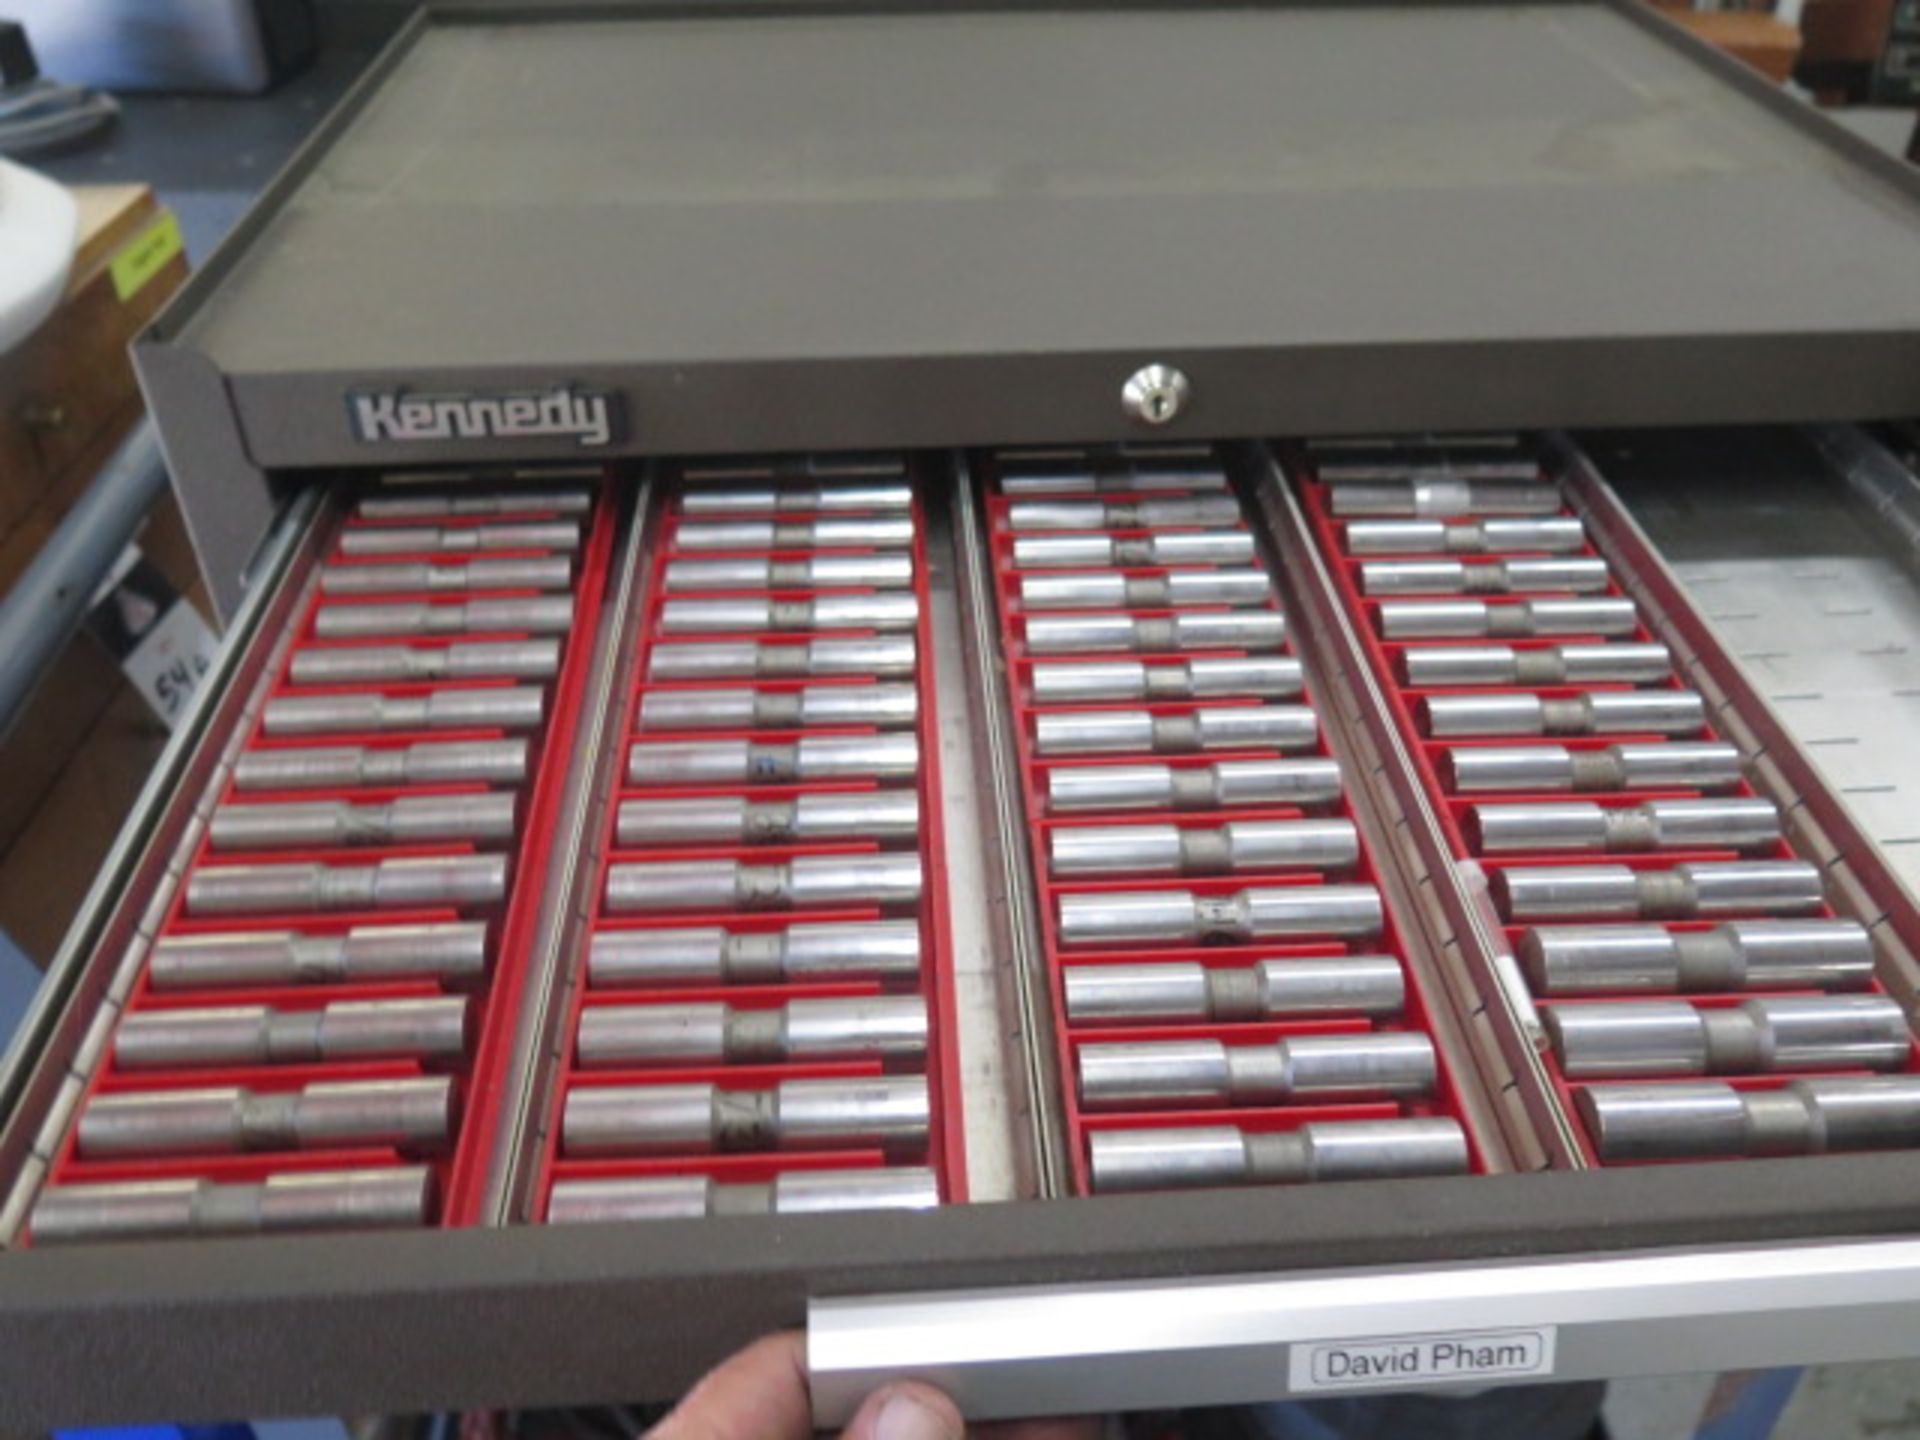 Kennedy 5-Drawer Tool Box w/ Deltronic Gage Pins and Pin Gage Sets (SOLD AS-IS - NO WARRANTY) - Image 2 of 6